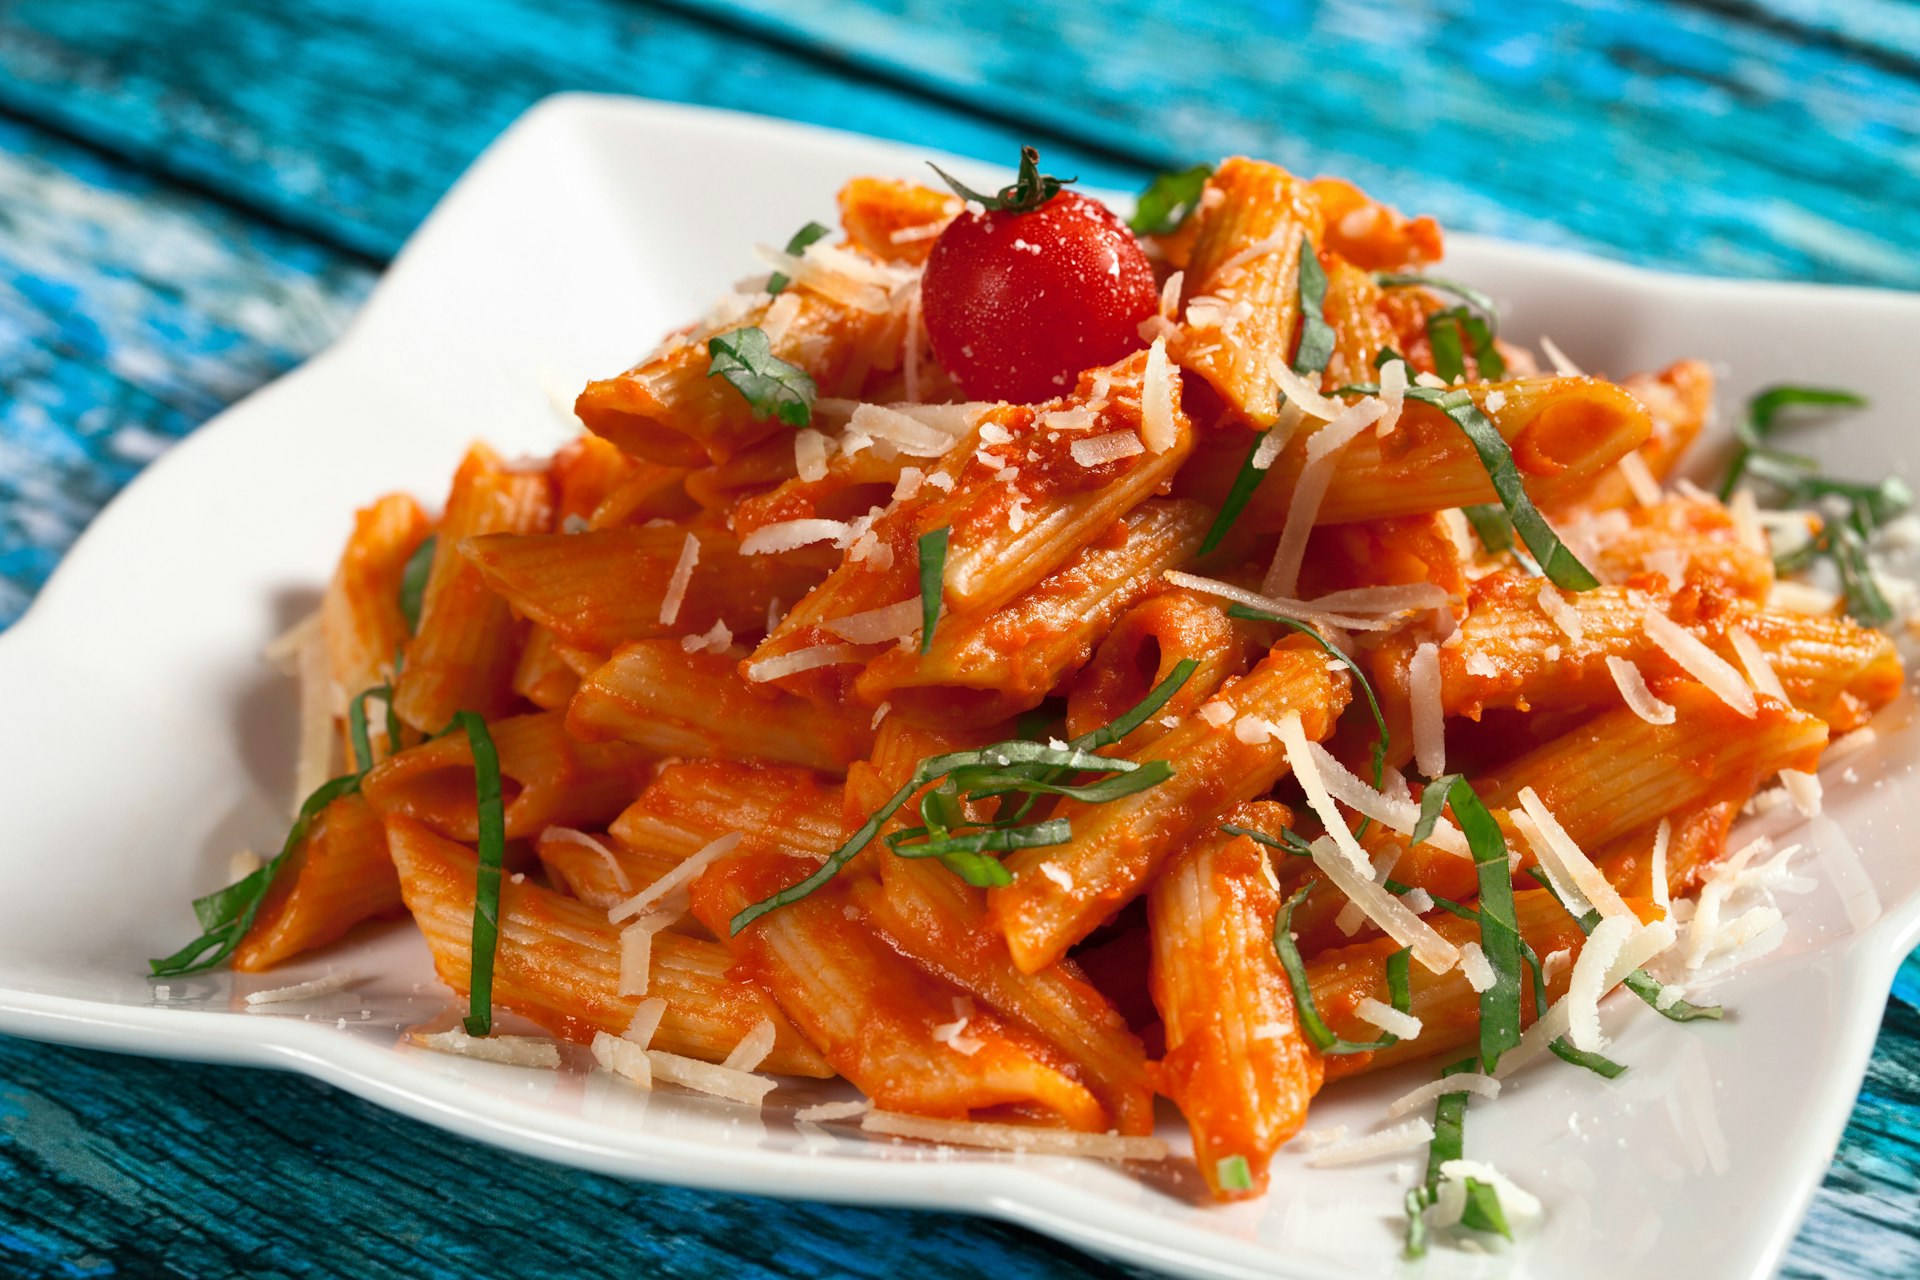 A plate of penne pasta